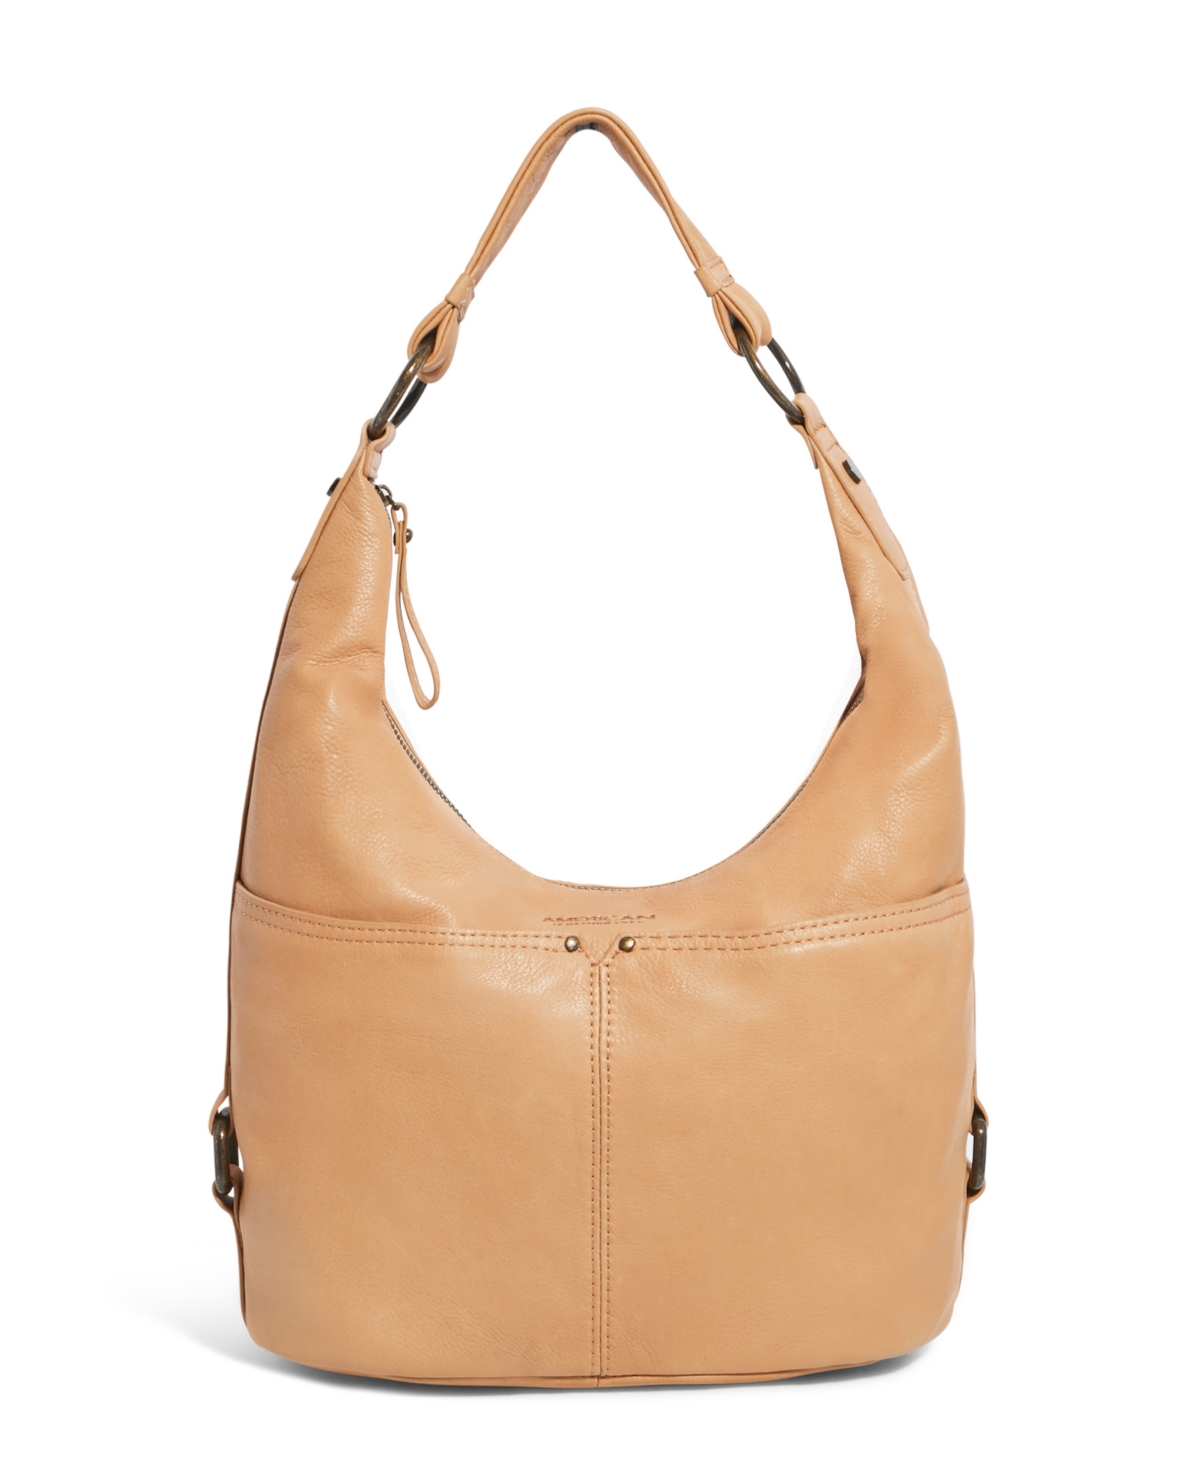 American Leather Co. Viv Hobo Bag In Cashew Smooth